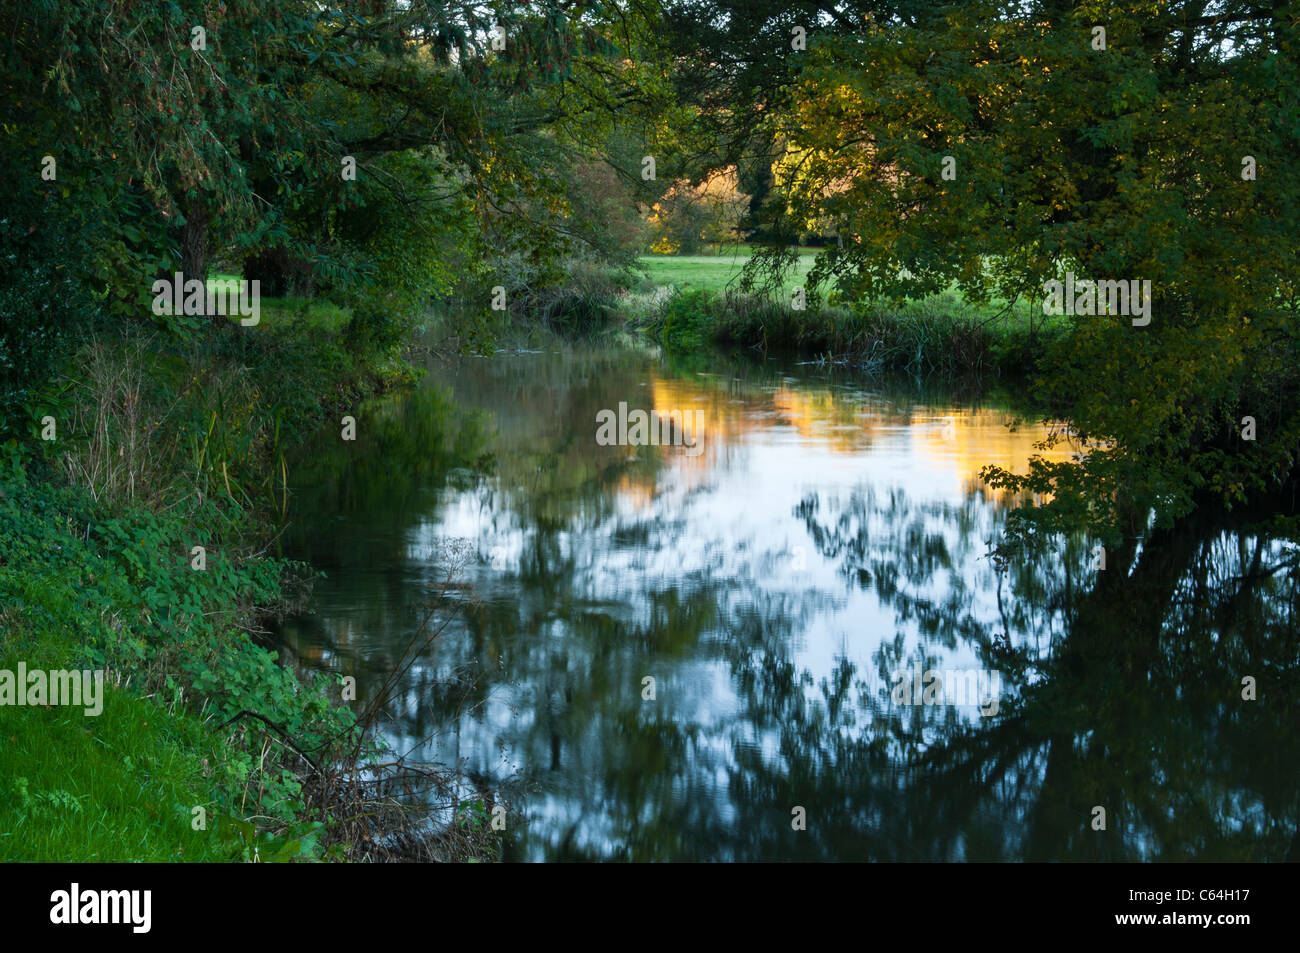 Autumn colours reflected in the River Cherwell which forms the boundary to the grounds of Rousham House in Oxfordshire, England Stock Photo